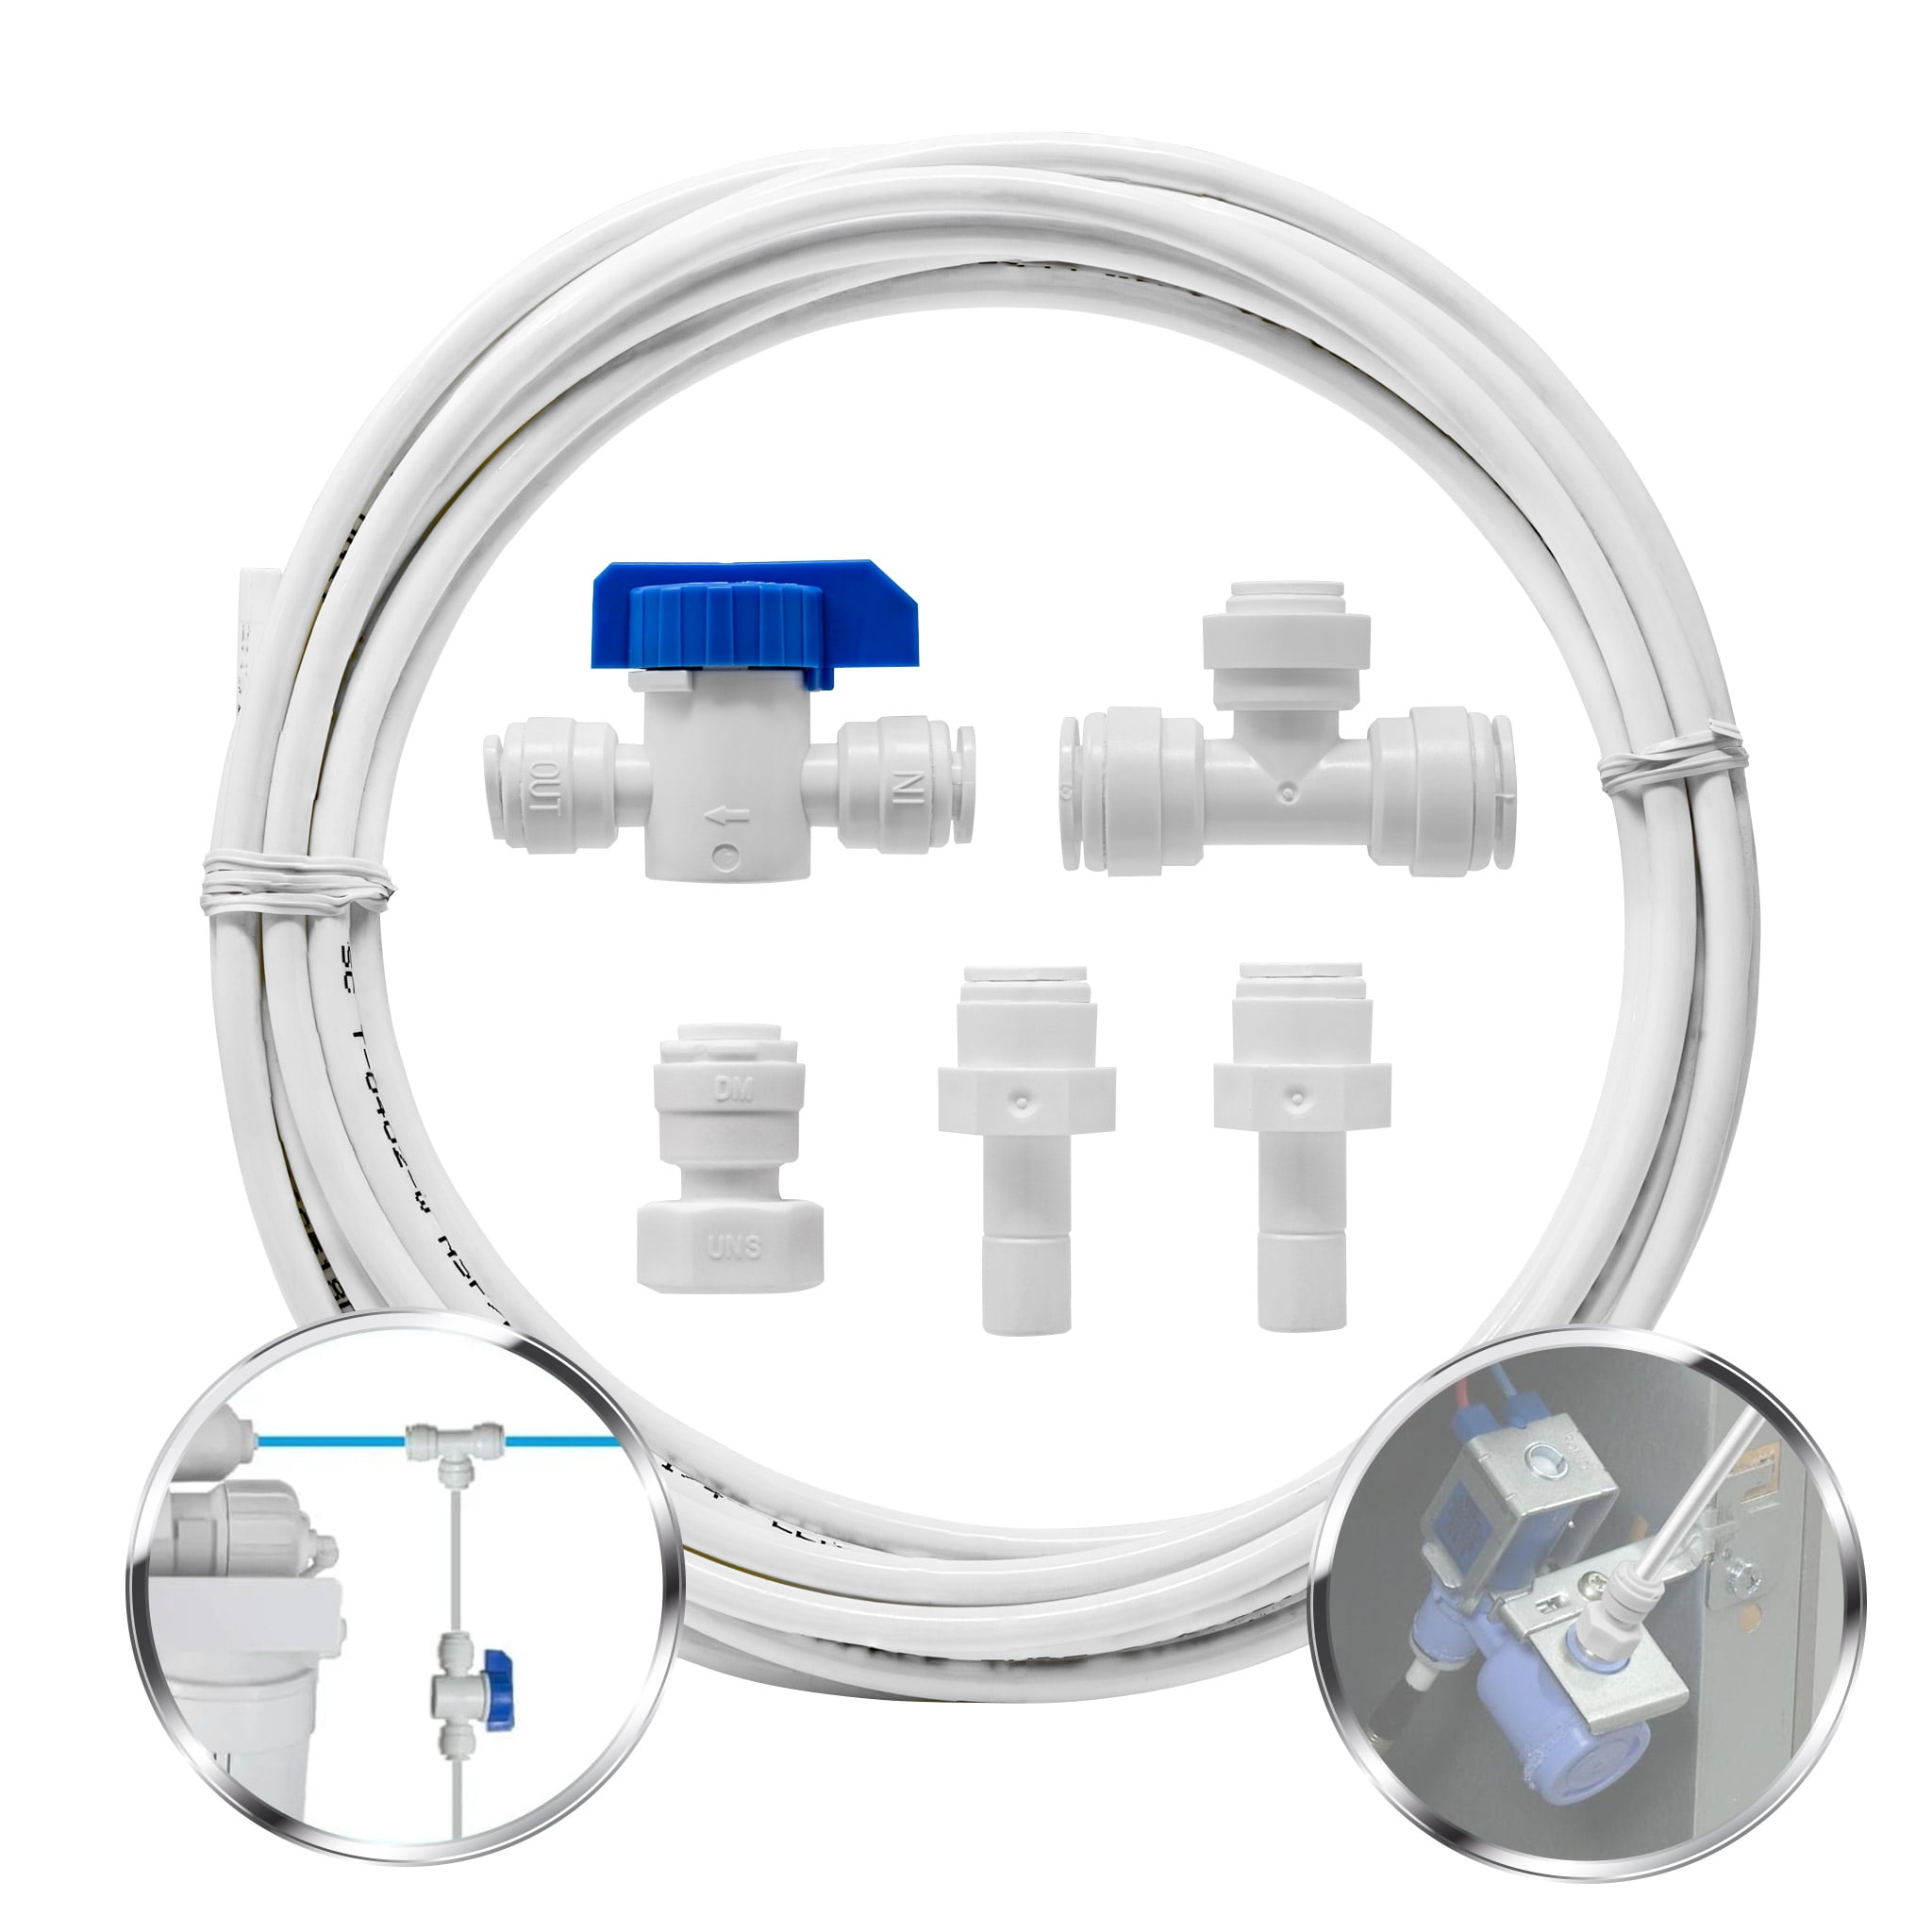 Metpure Ice Maker Fridge Installation Kit - 1/4 Fittings with 1/4 OD 25  Feet White Tubing for Potable Drinking Water